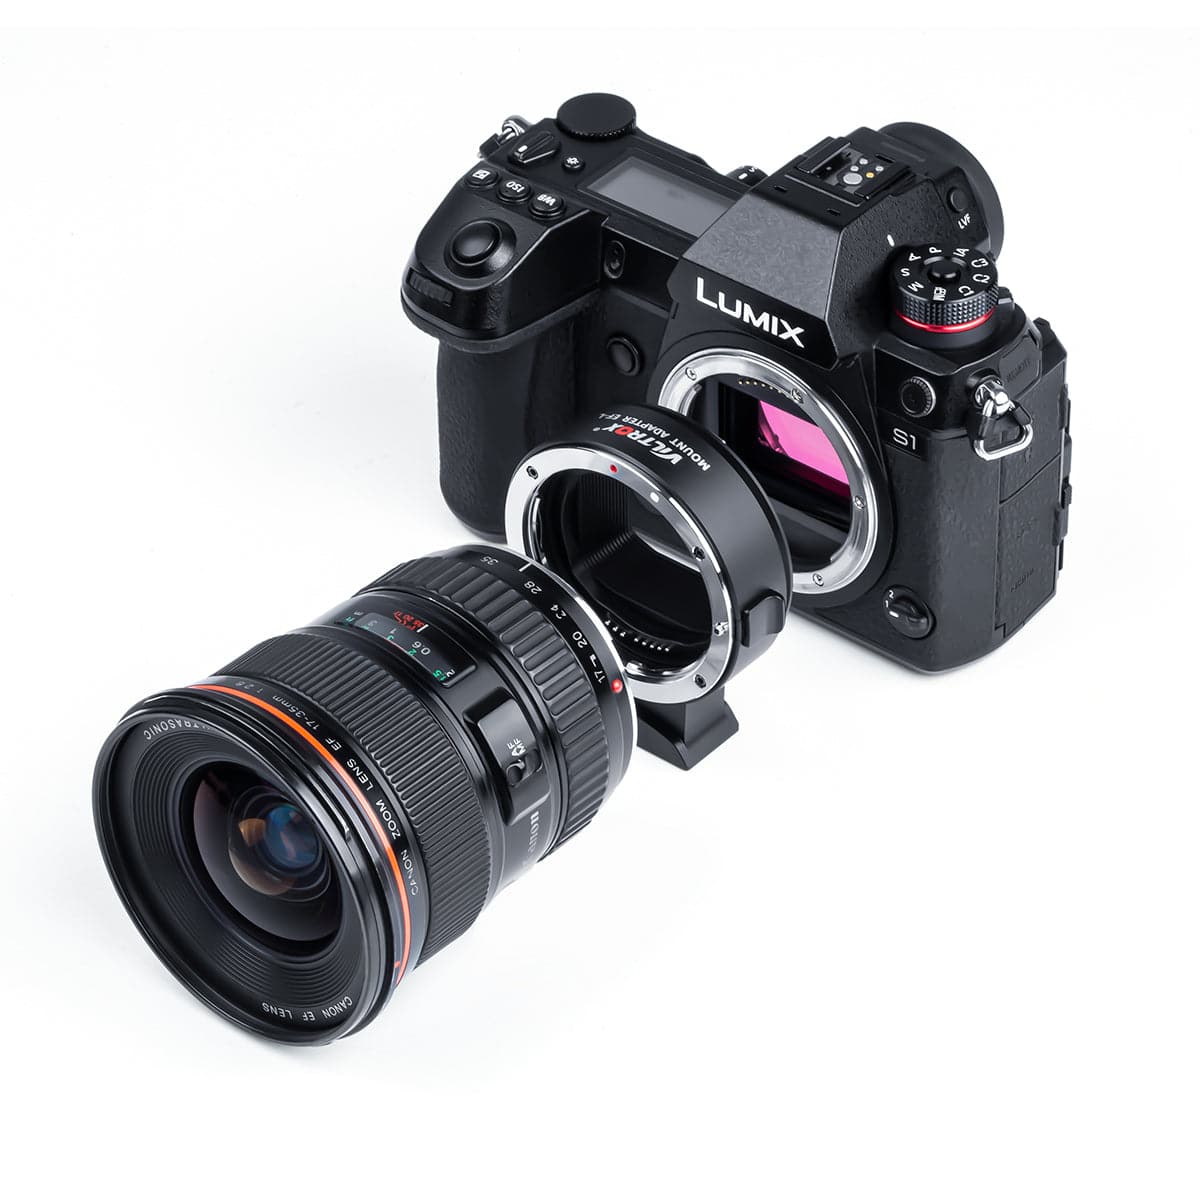 Viltrox EF-L Auto Focus Lens Mount Adapter For Canon EF/EF-S Lens Matched with Leica/Panasonic/Sigma L-mount Bodies